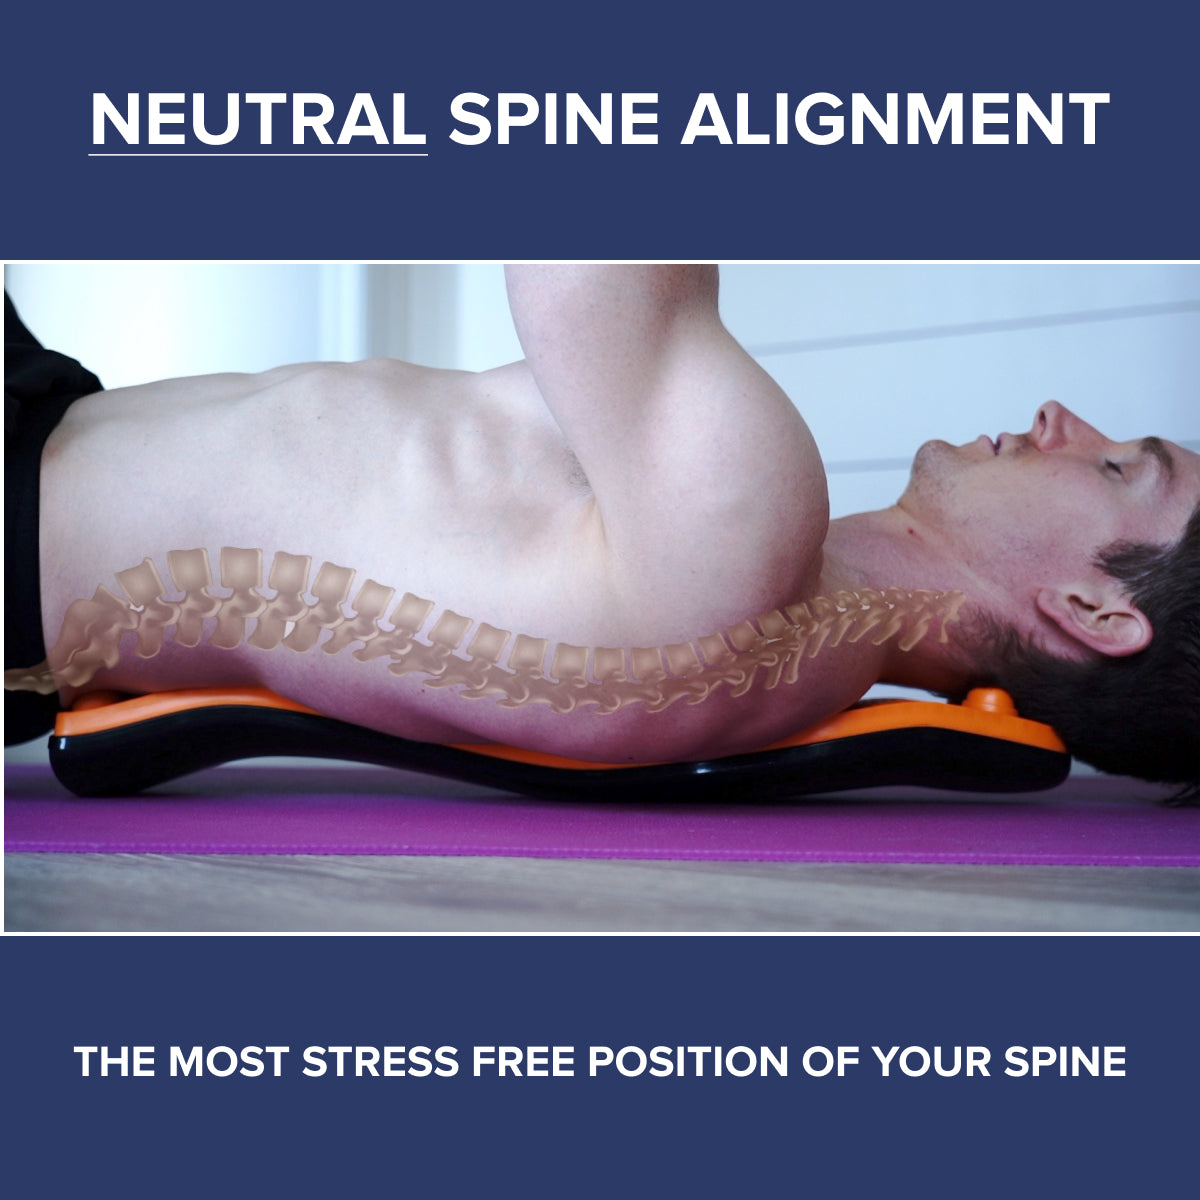 Trigger Point Rocker's ergonomic design in action promoting natural spine alignment and stress free posture.